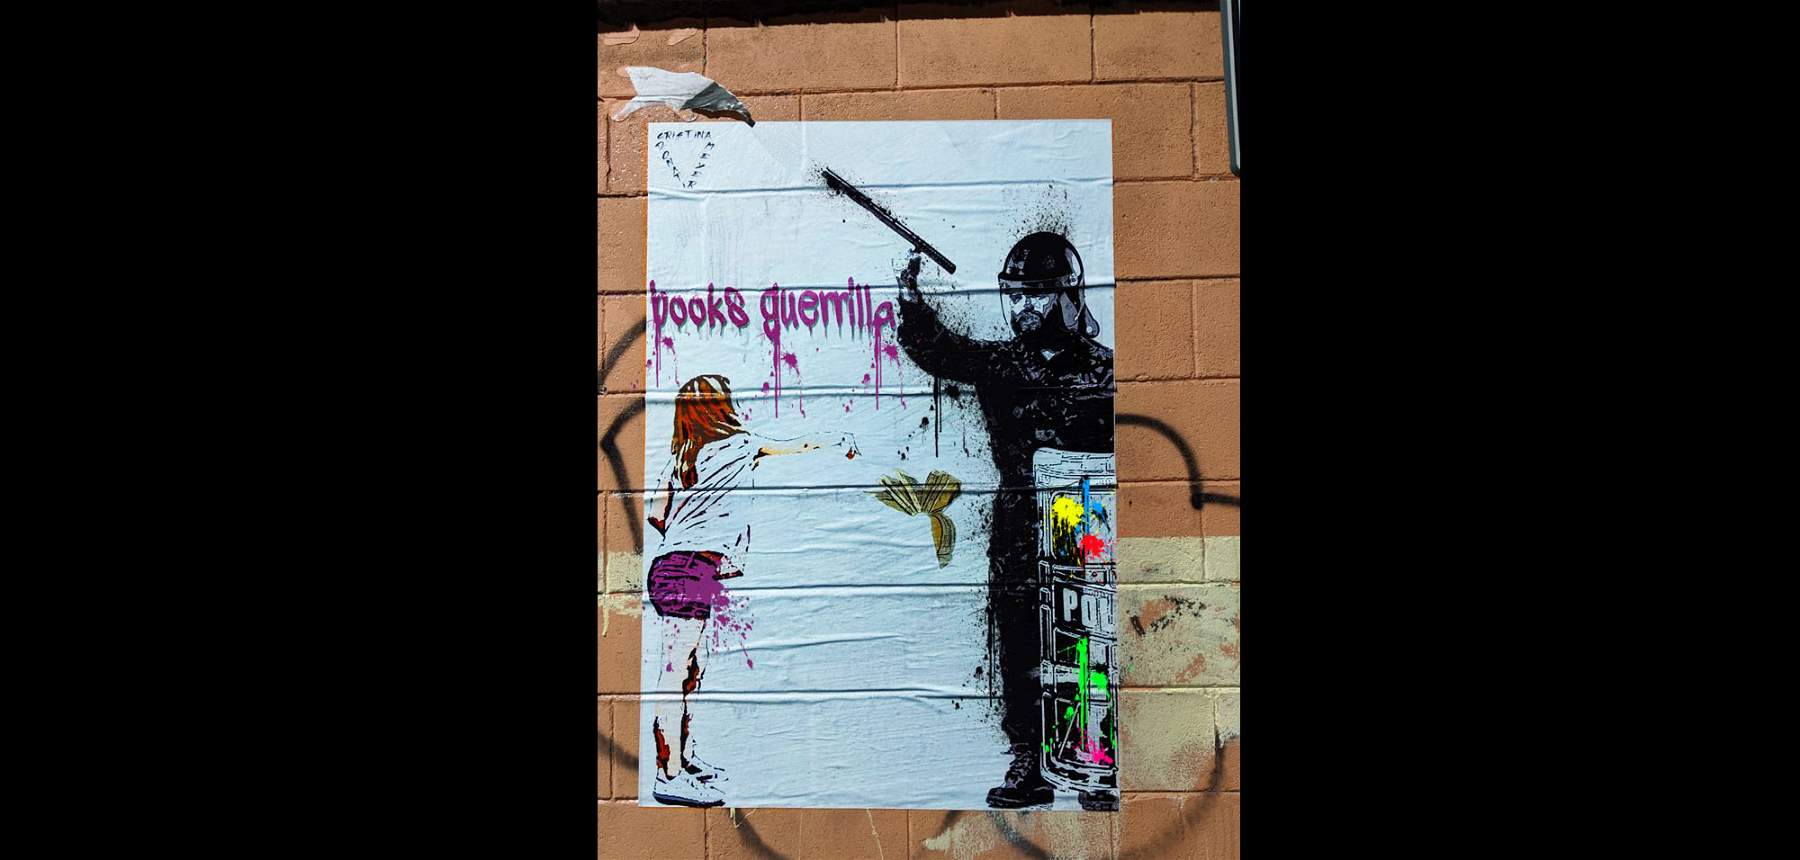 Street art against police officers beating students. The work of Cristina Donati Meyer